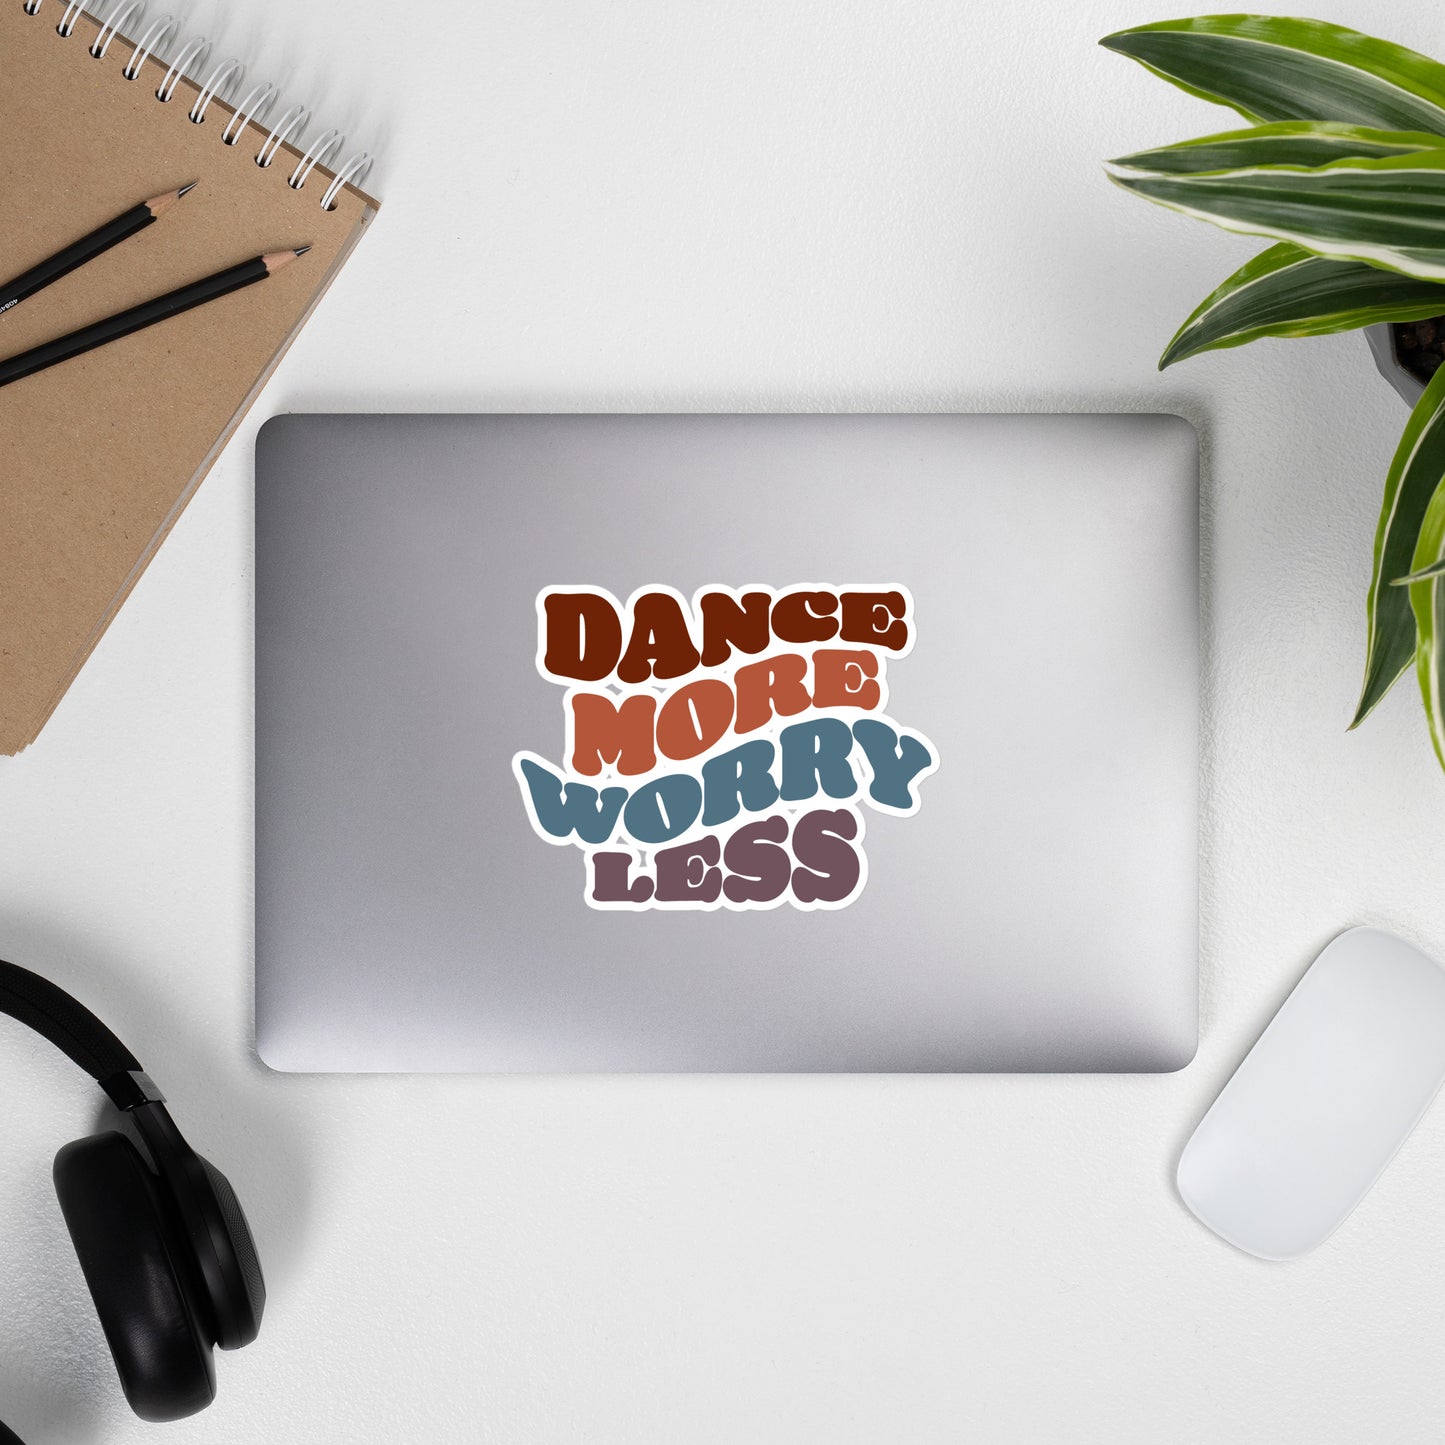 DANCE MORE WORRY LESS Bubble-free stickers